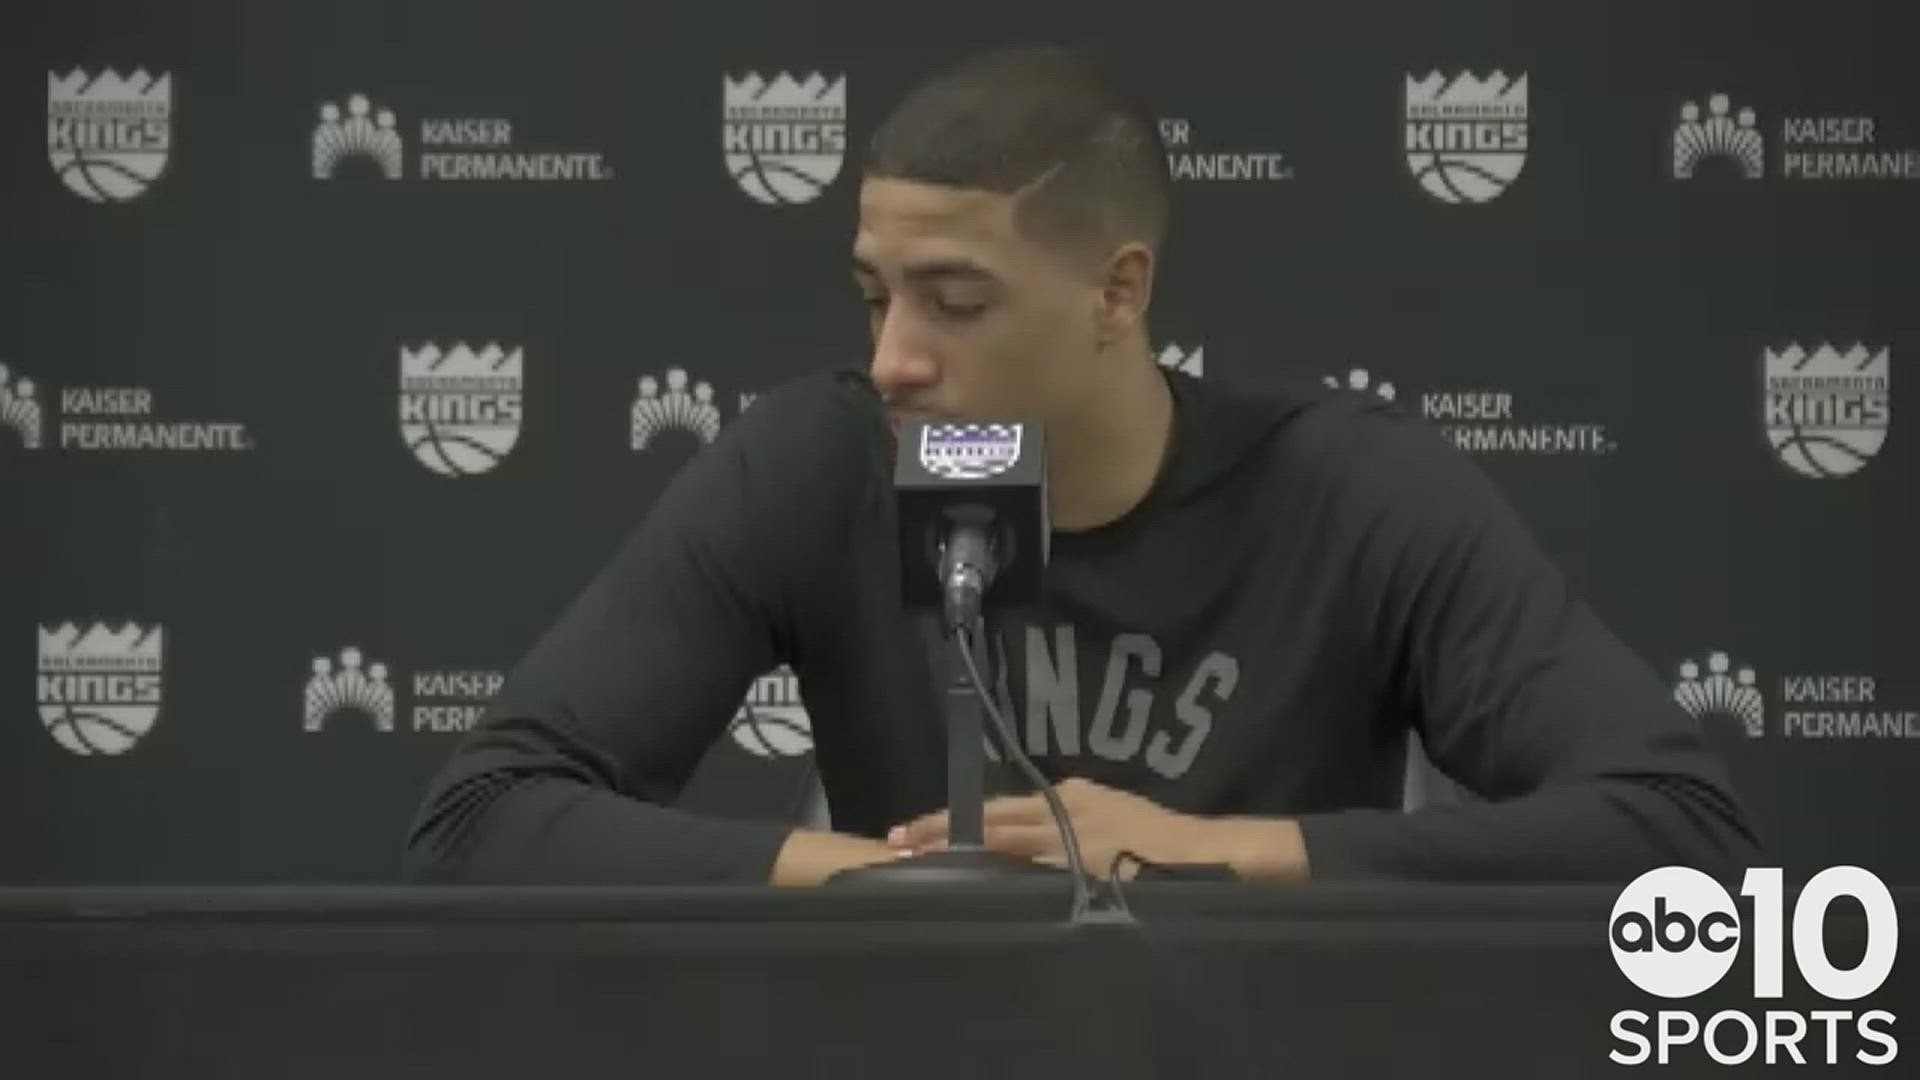 Tyrese Haliburton says his Kings must play better after dropping six of their last seven games, and understands why Sacramento fans booed in the loss to the Raptors.